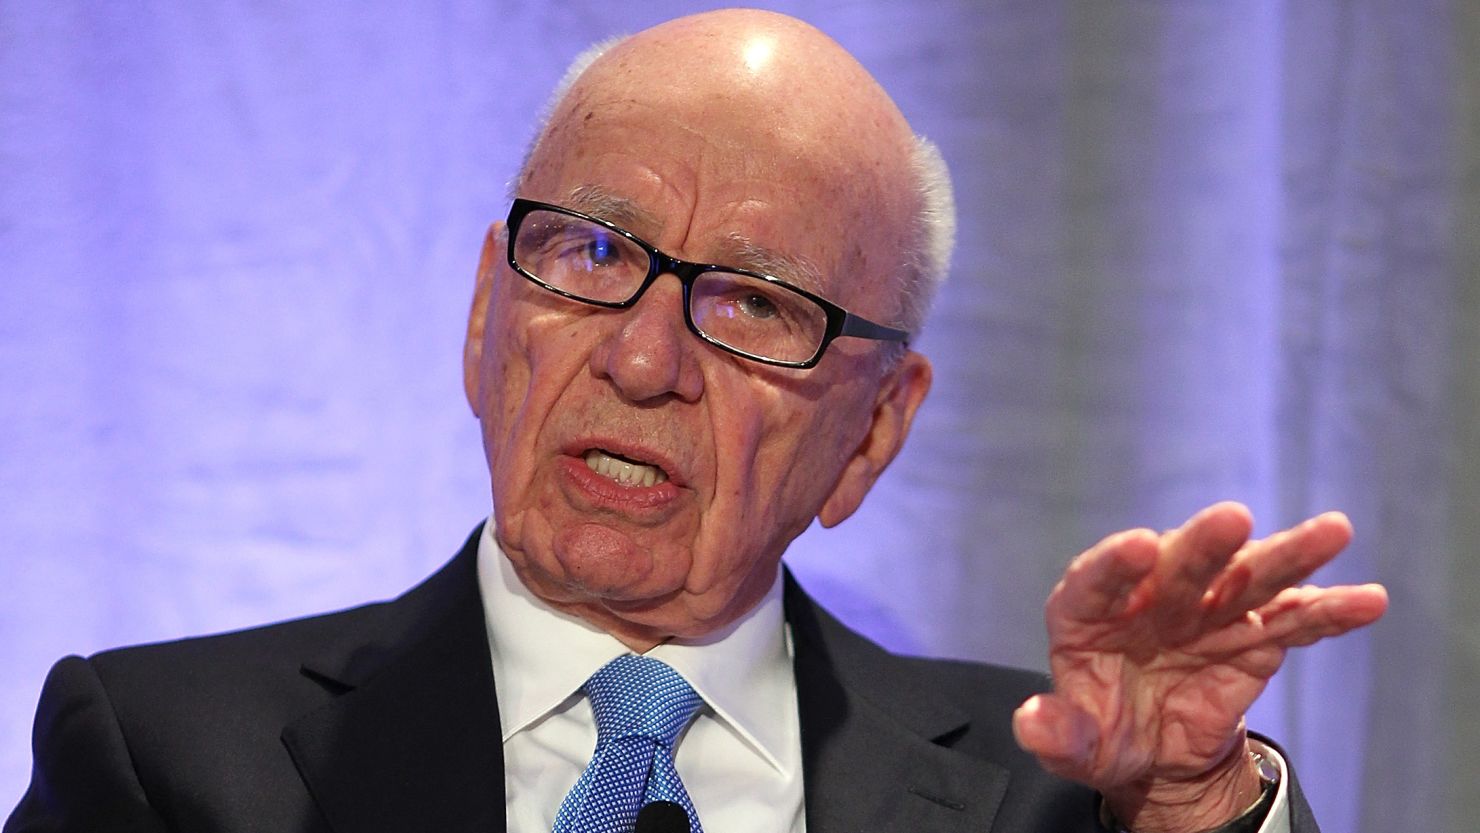 Rupert Murdoch claimed he had been "humbled" by the phone-hacking scandal, which led him to close the News Of The World.